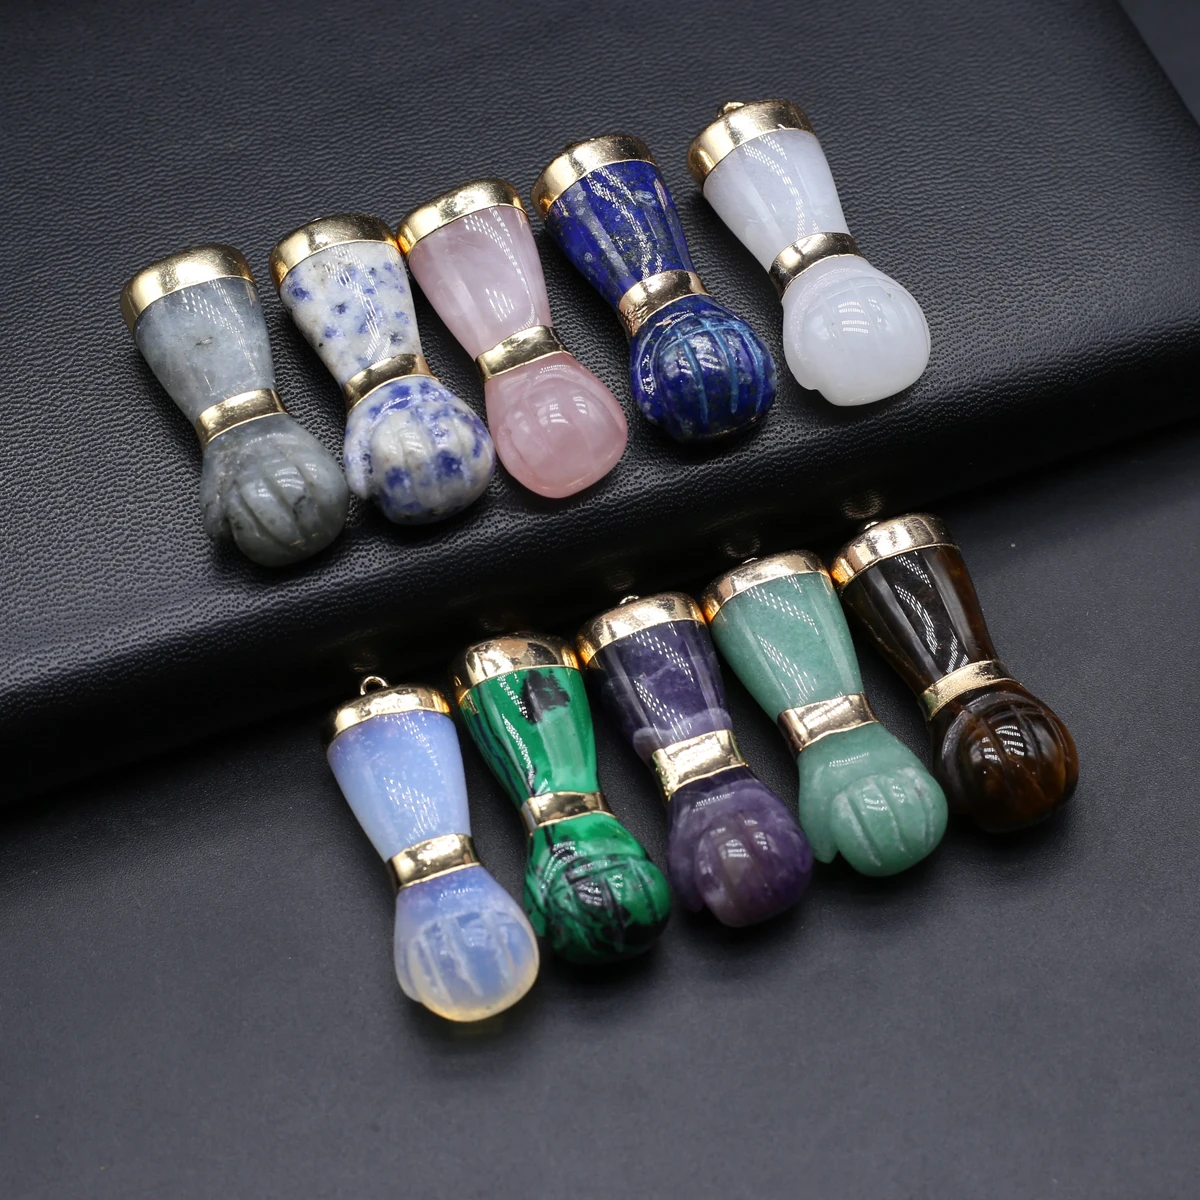 

5PCS Random Natural Stone Sodalite Amethysts Opal Fist Shape Pendant Jewelry Making DIY Necklace Earrings Accessories Gift